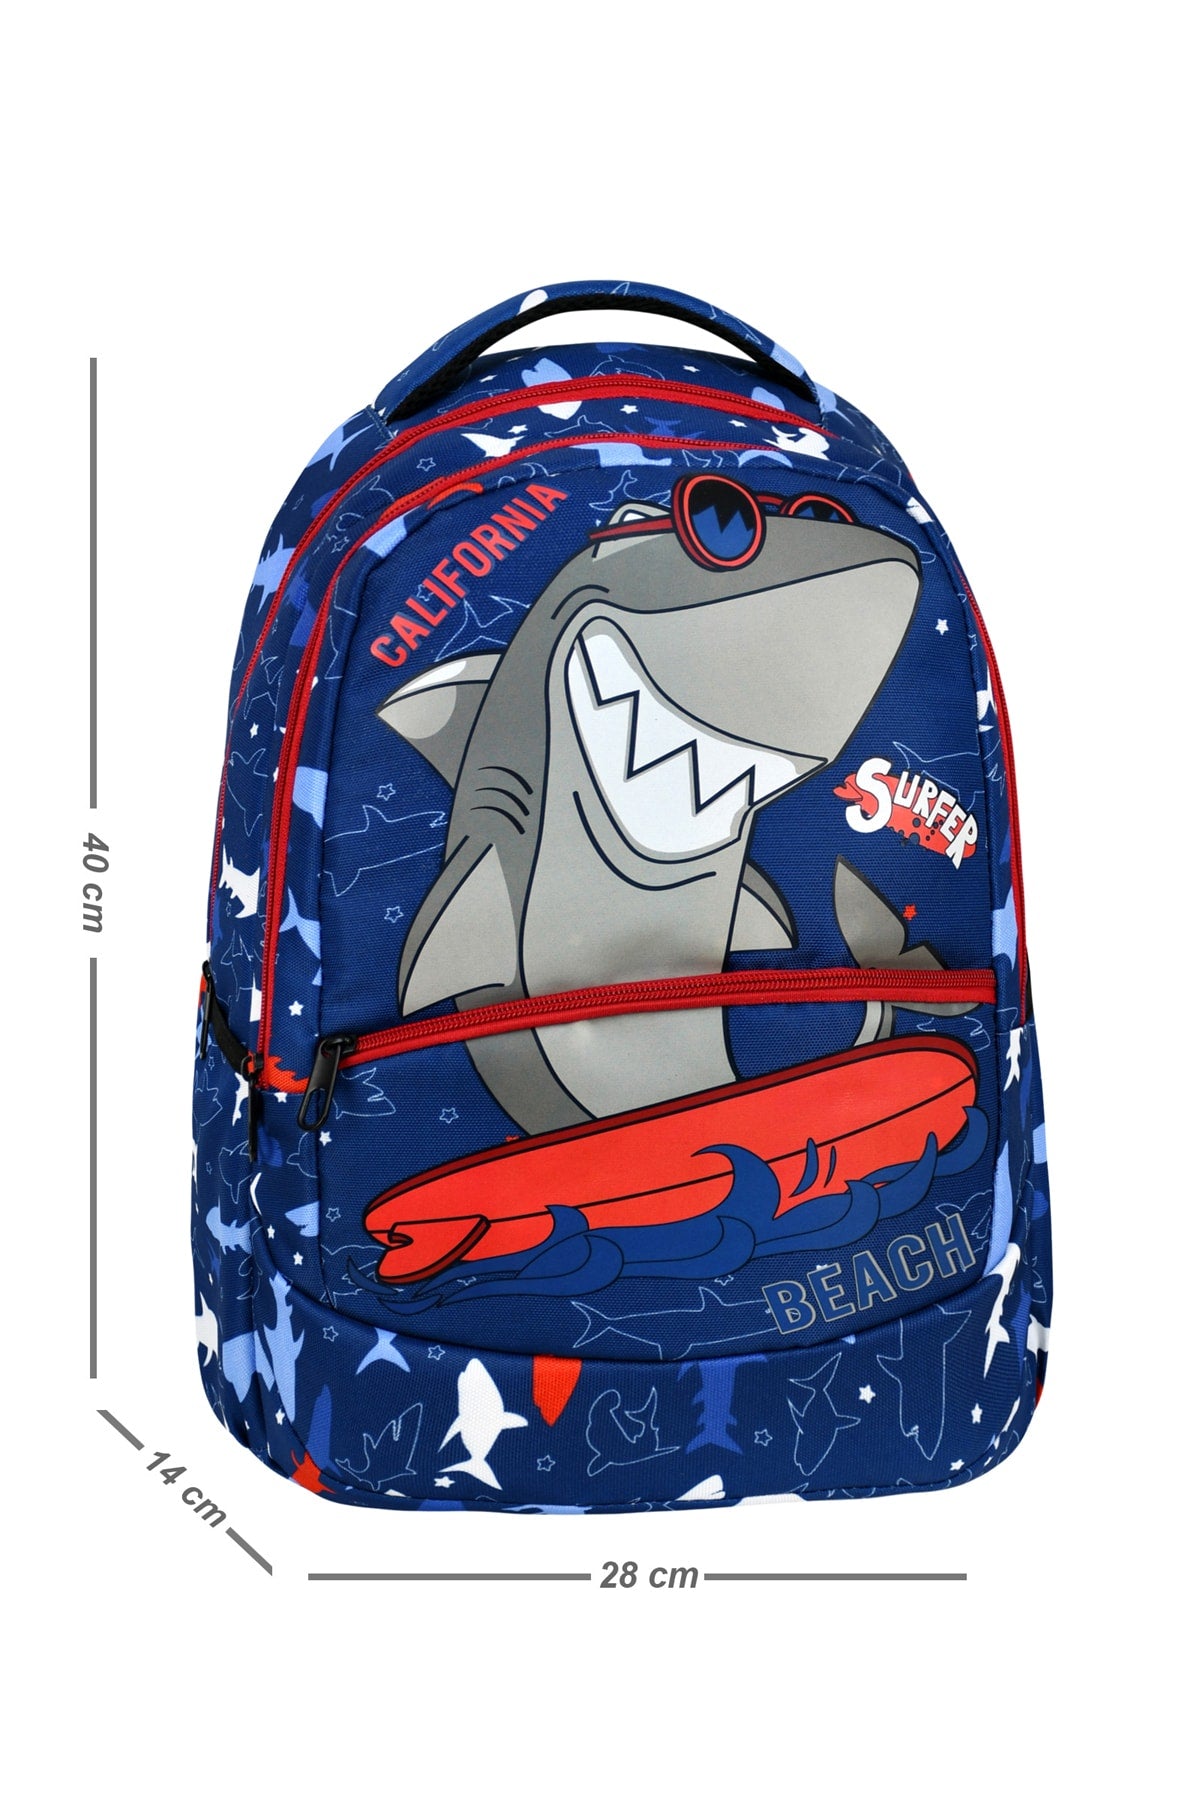 3-pack Primary School Shark Patterned School Bag With Food And Pencil Holder For Boys